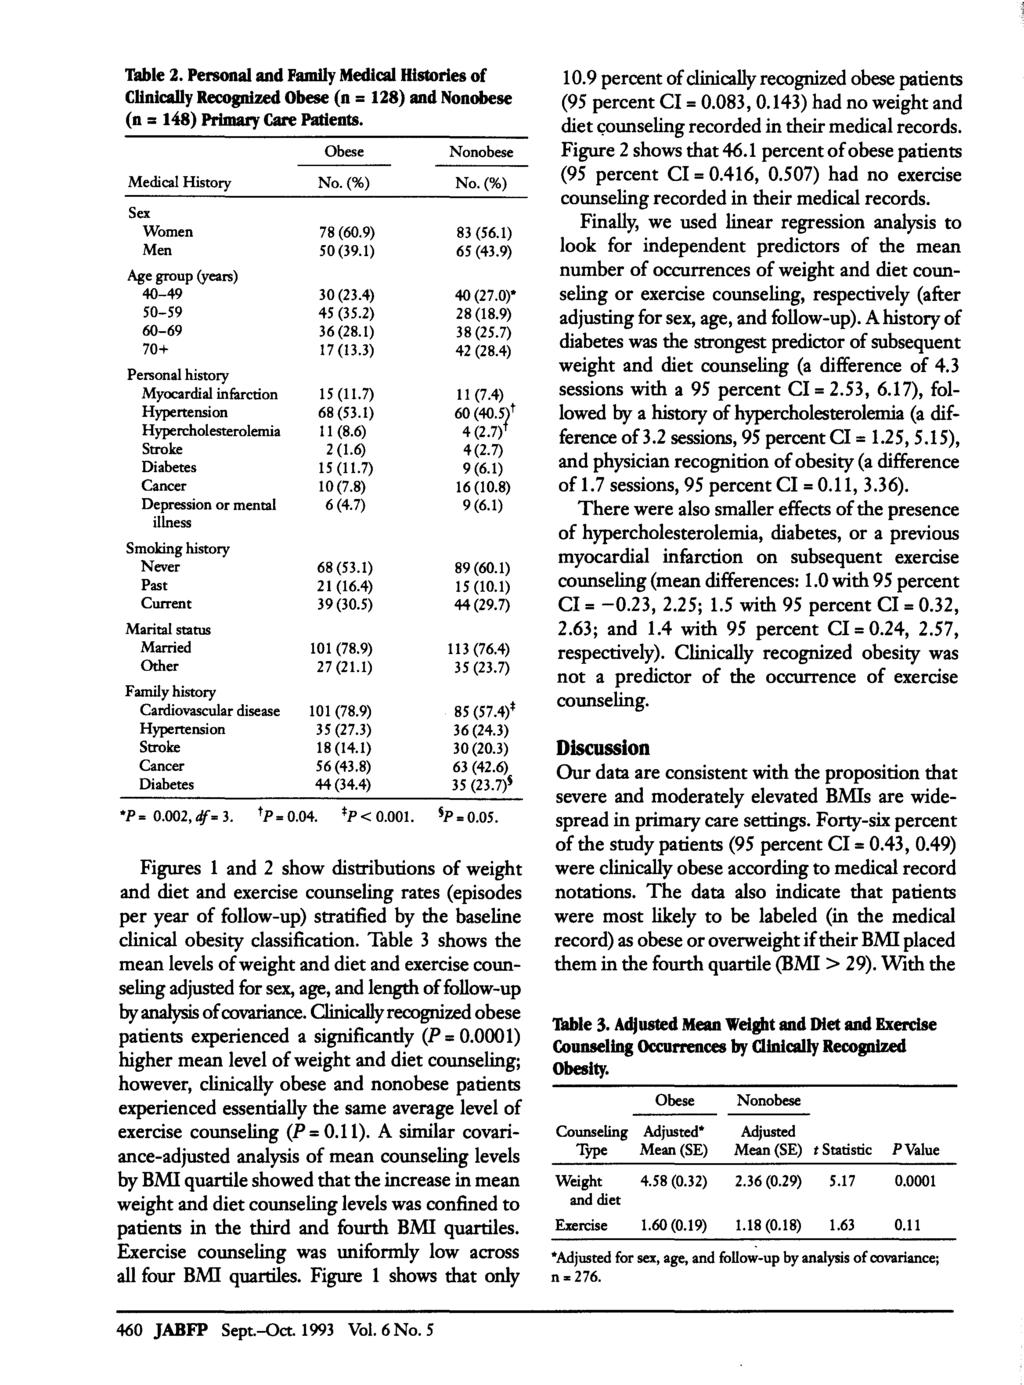 Table 2. Personal and Family Medical Histories of Clinically Recognized Obese (n = 128) and Nonobese (n = 148) Primary Care Patients. Obese Nonobese Medical History No. (%) No. (%) Sex Women 78 (60.